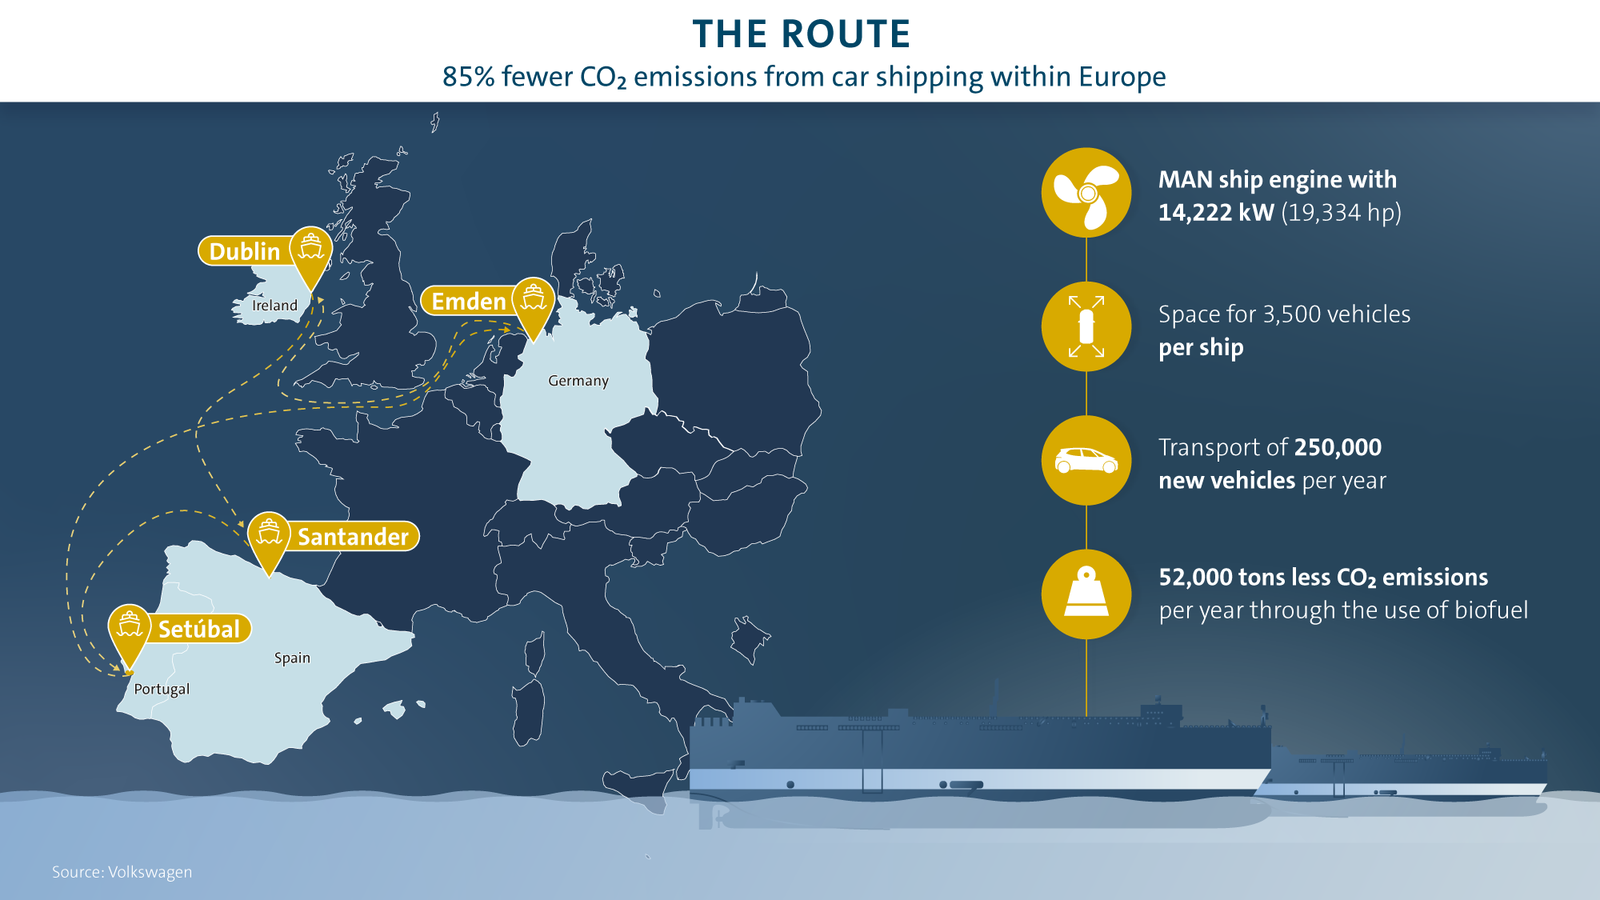 Fuel from waste: Volkswagen powers car freighters with used oil from restaurants